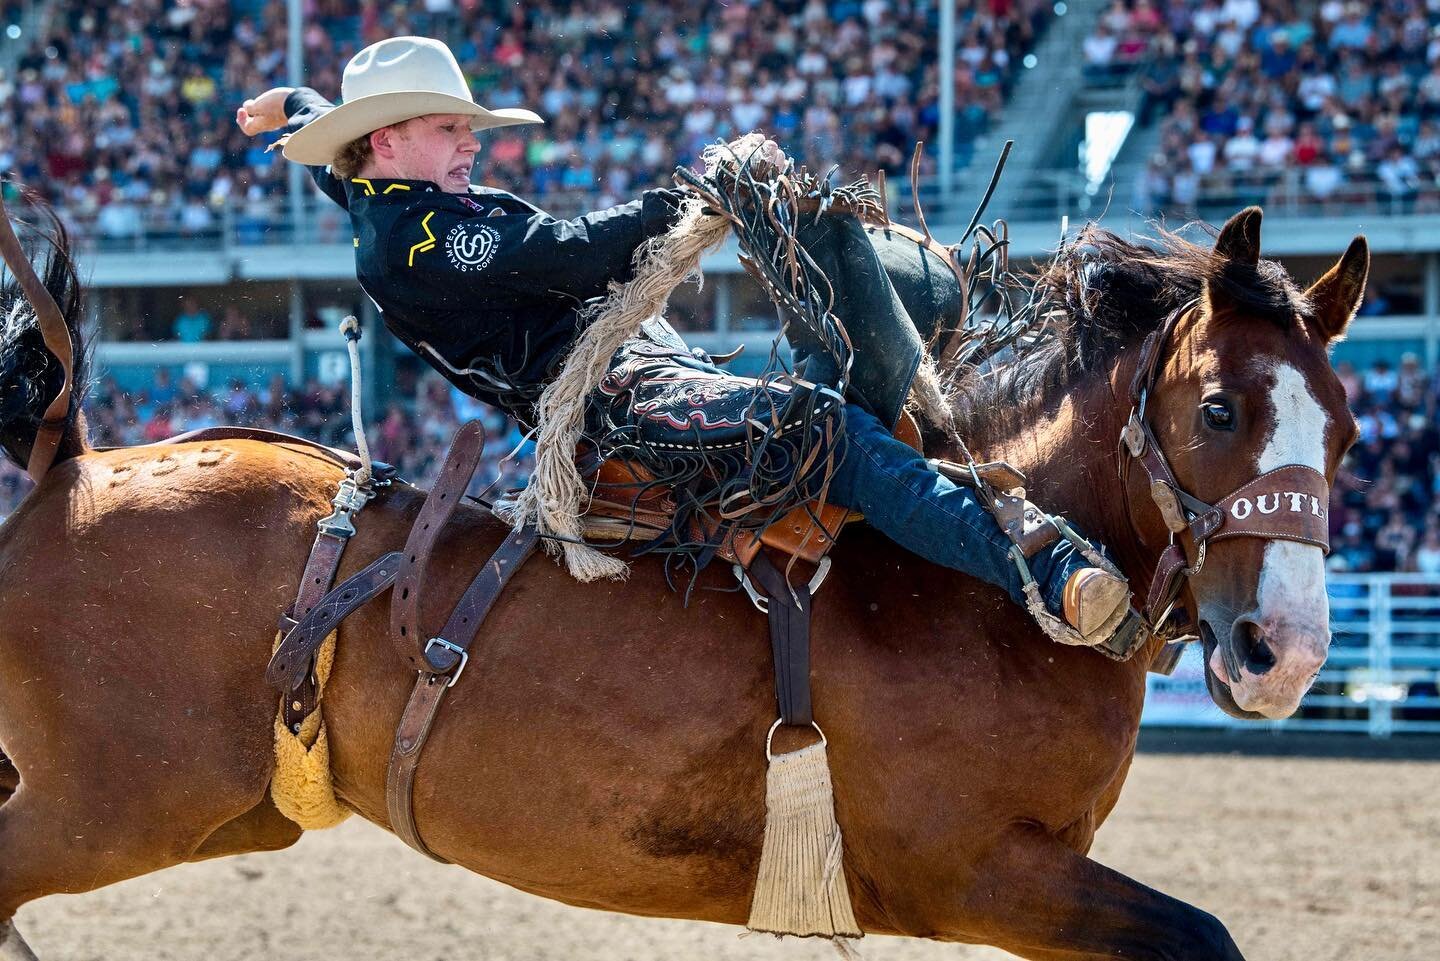 Dust, adrenaline, and a whole lot of heart

Catch the action August 2nd - August 5th at the Strathmore Stampede 🐴

📸: @ovation29 

#strathmorestampede #rodeo